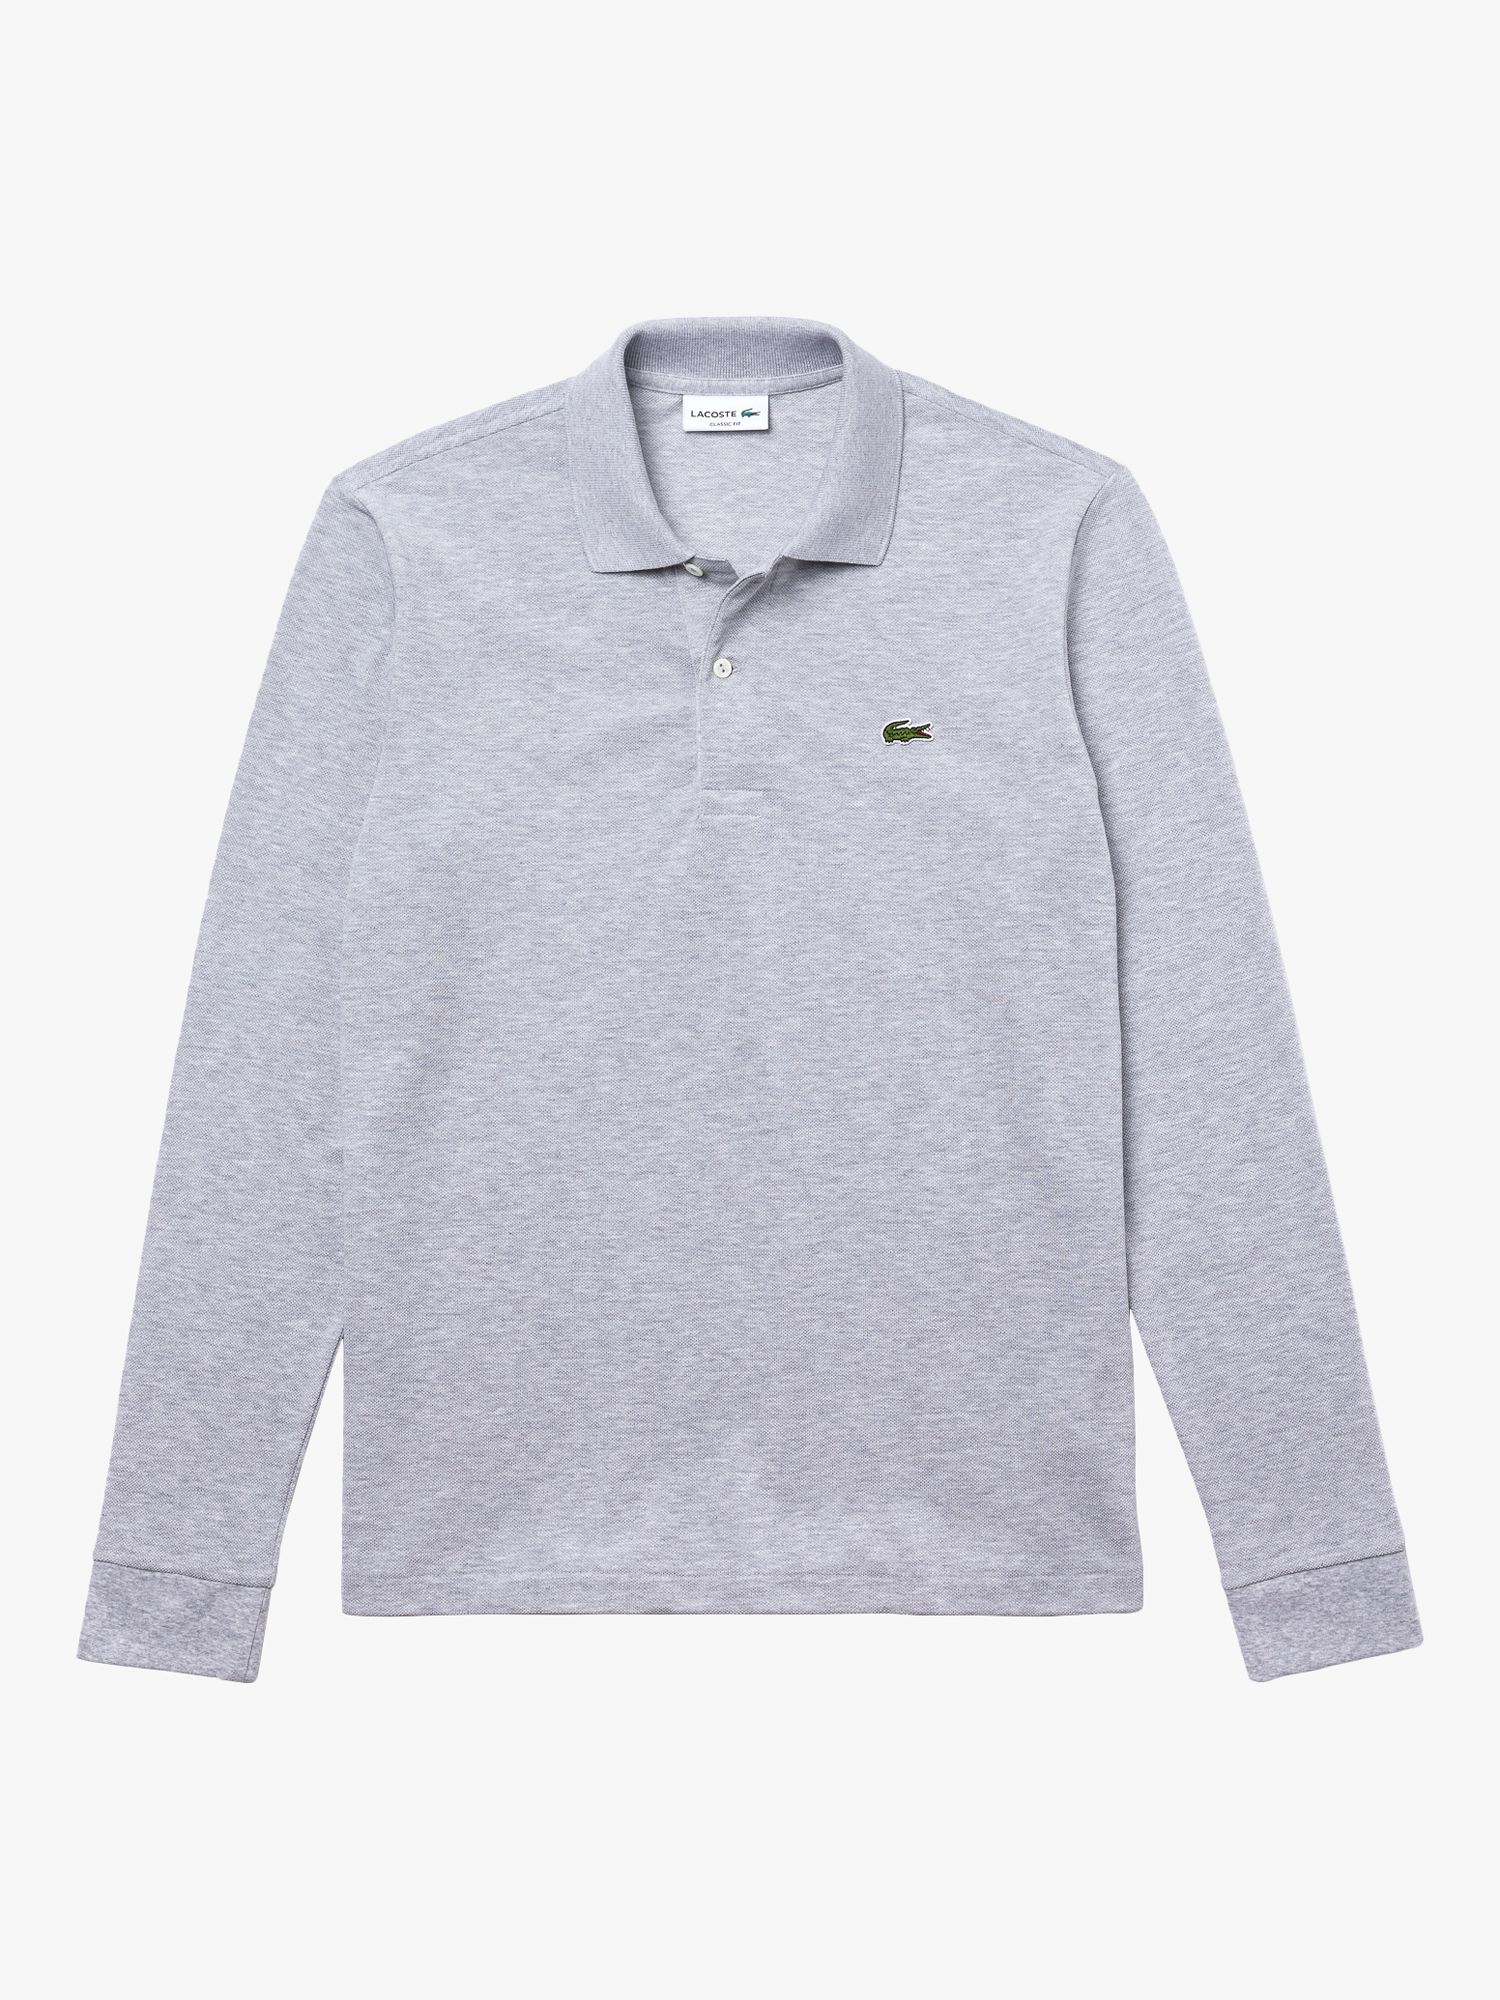 Lacoste L.13.12 Classic Regular Fit Long Sleeve Polo Grey John Lewis & Partners